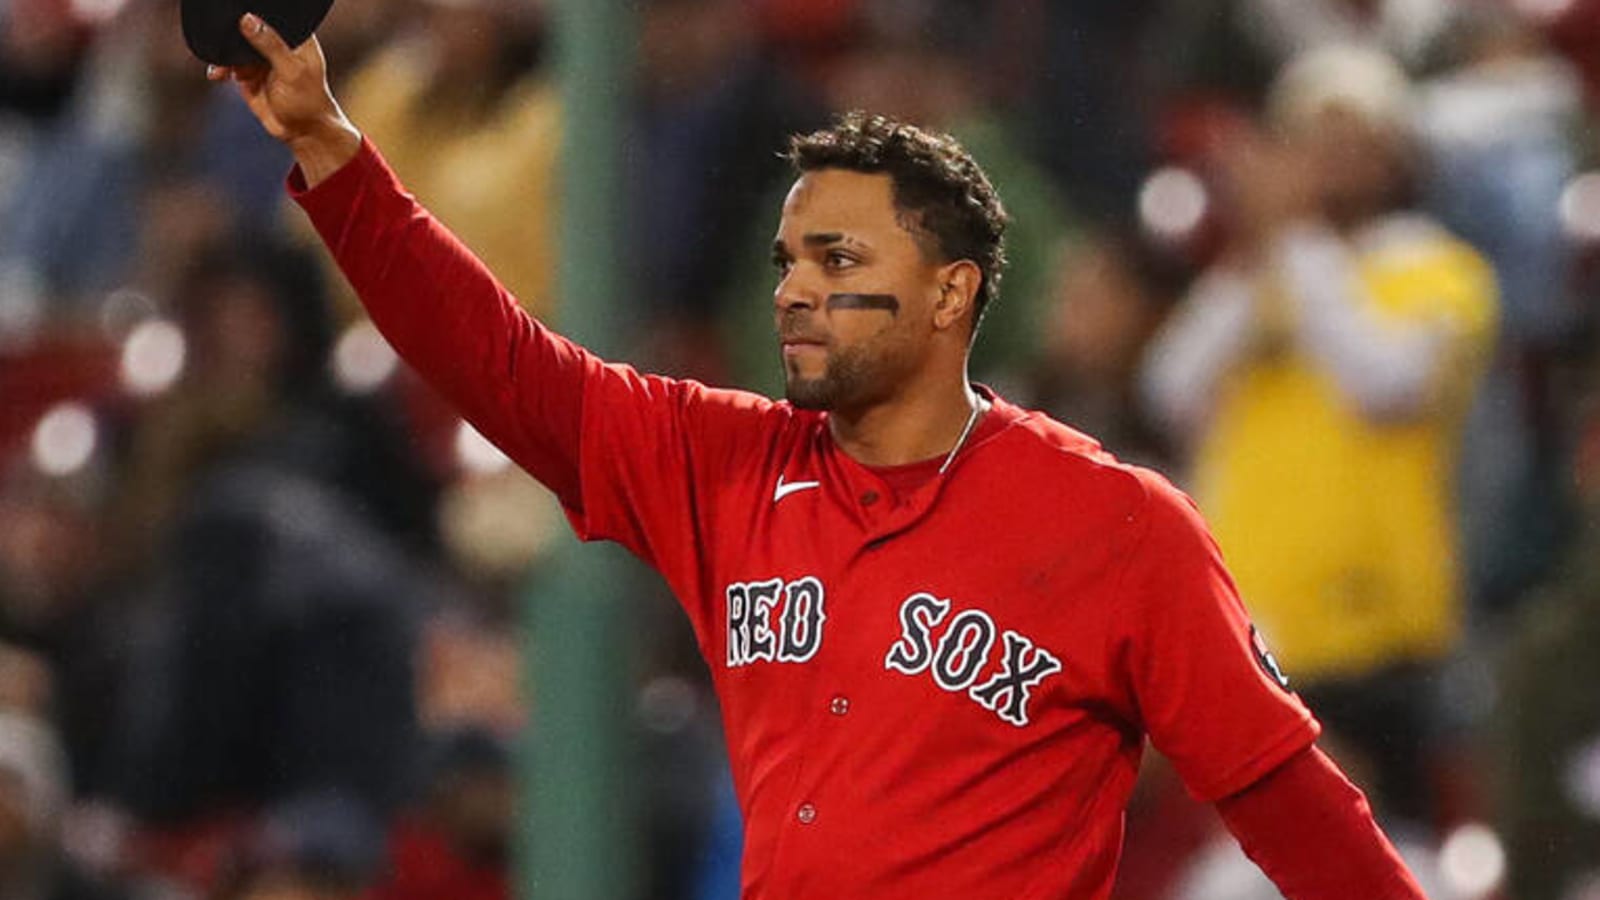 Surprising NL team in mix to sign Bogaerts